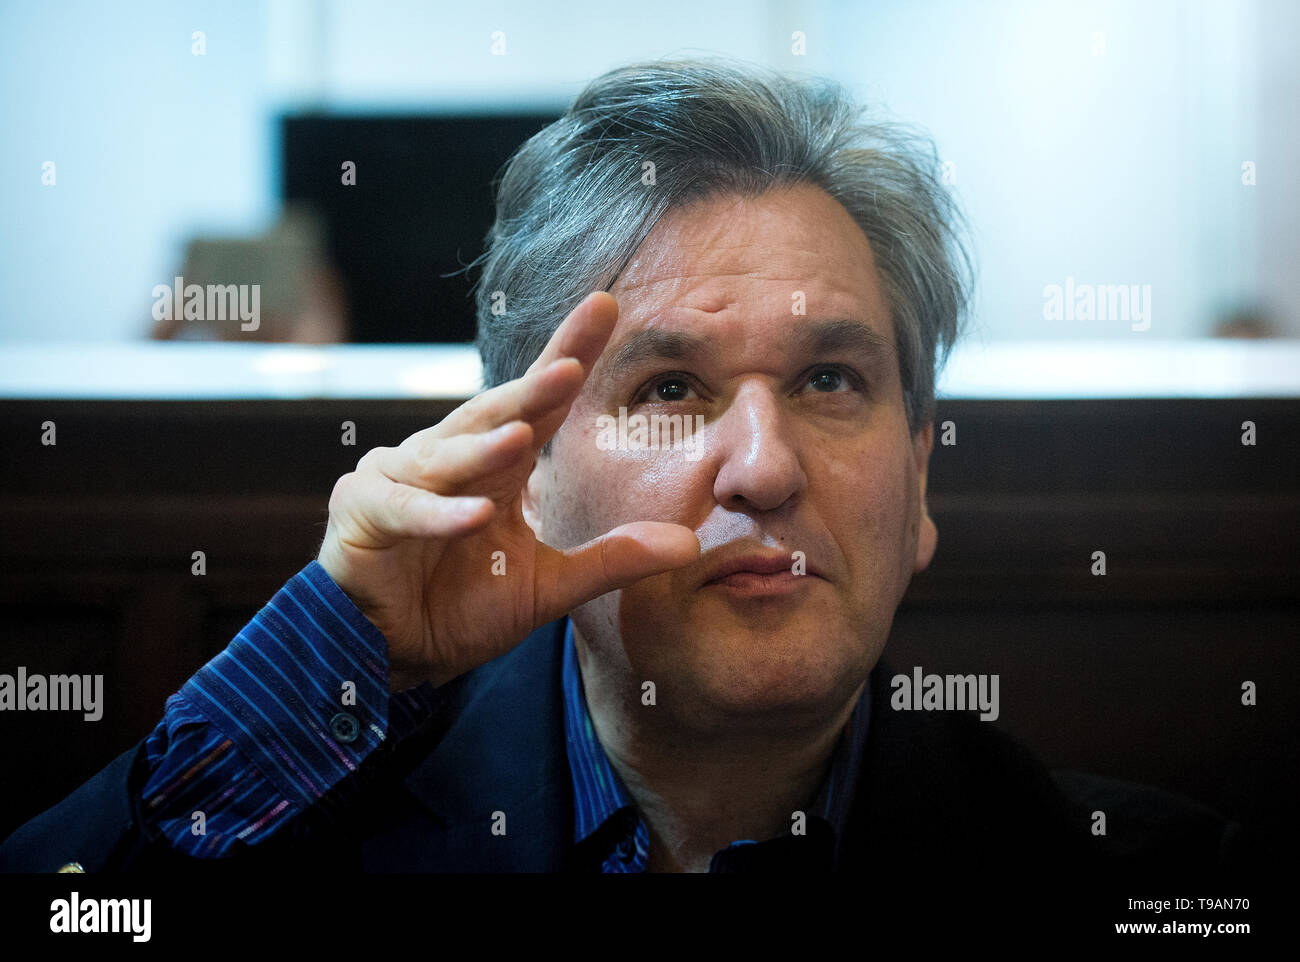 Prague, Czech Republic. 17th May, 2019. Chief conductor Sir Antonio Pappano attends the press conference prior to Concert by Orchestra dell'Accademia Nazionale di Santa cecilia Roma during the Prague Spring International Music Festival in Prague, Czech Republic, May 17, 2019. Credit: Katerina Sulova/CTK Photo/Alamy Live News Stock Photo